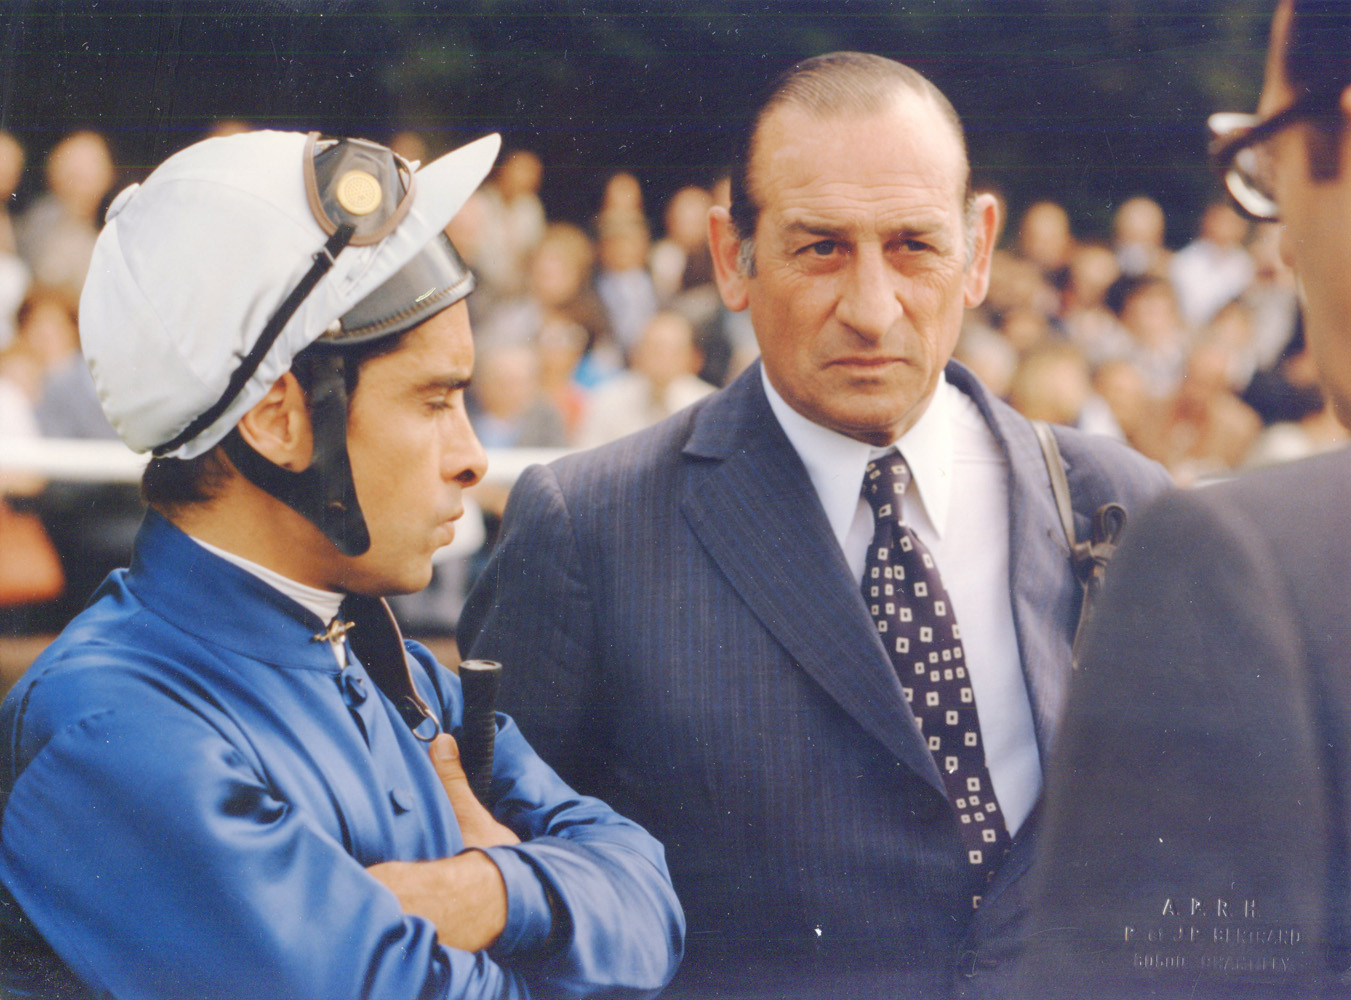 Jockey Yves Saint Martin and trainer Angel Penna, Sr. at Chantilly, December 1977 (A. P. R. H. Bertrand/Museum Collection)